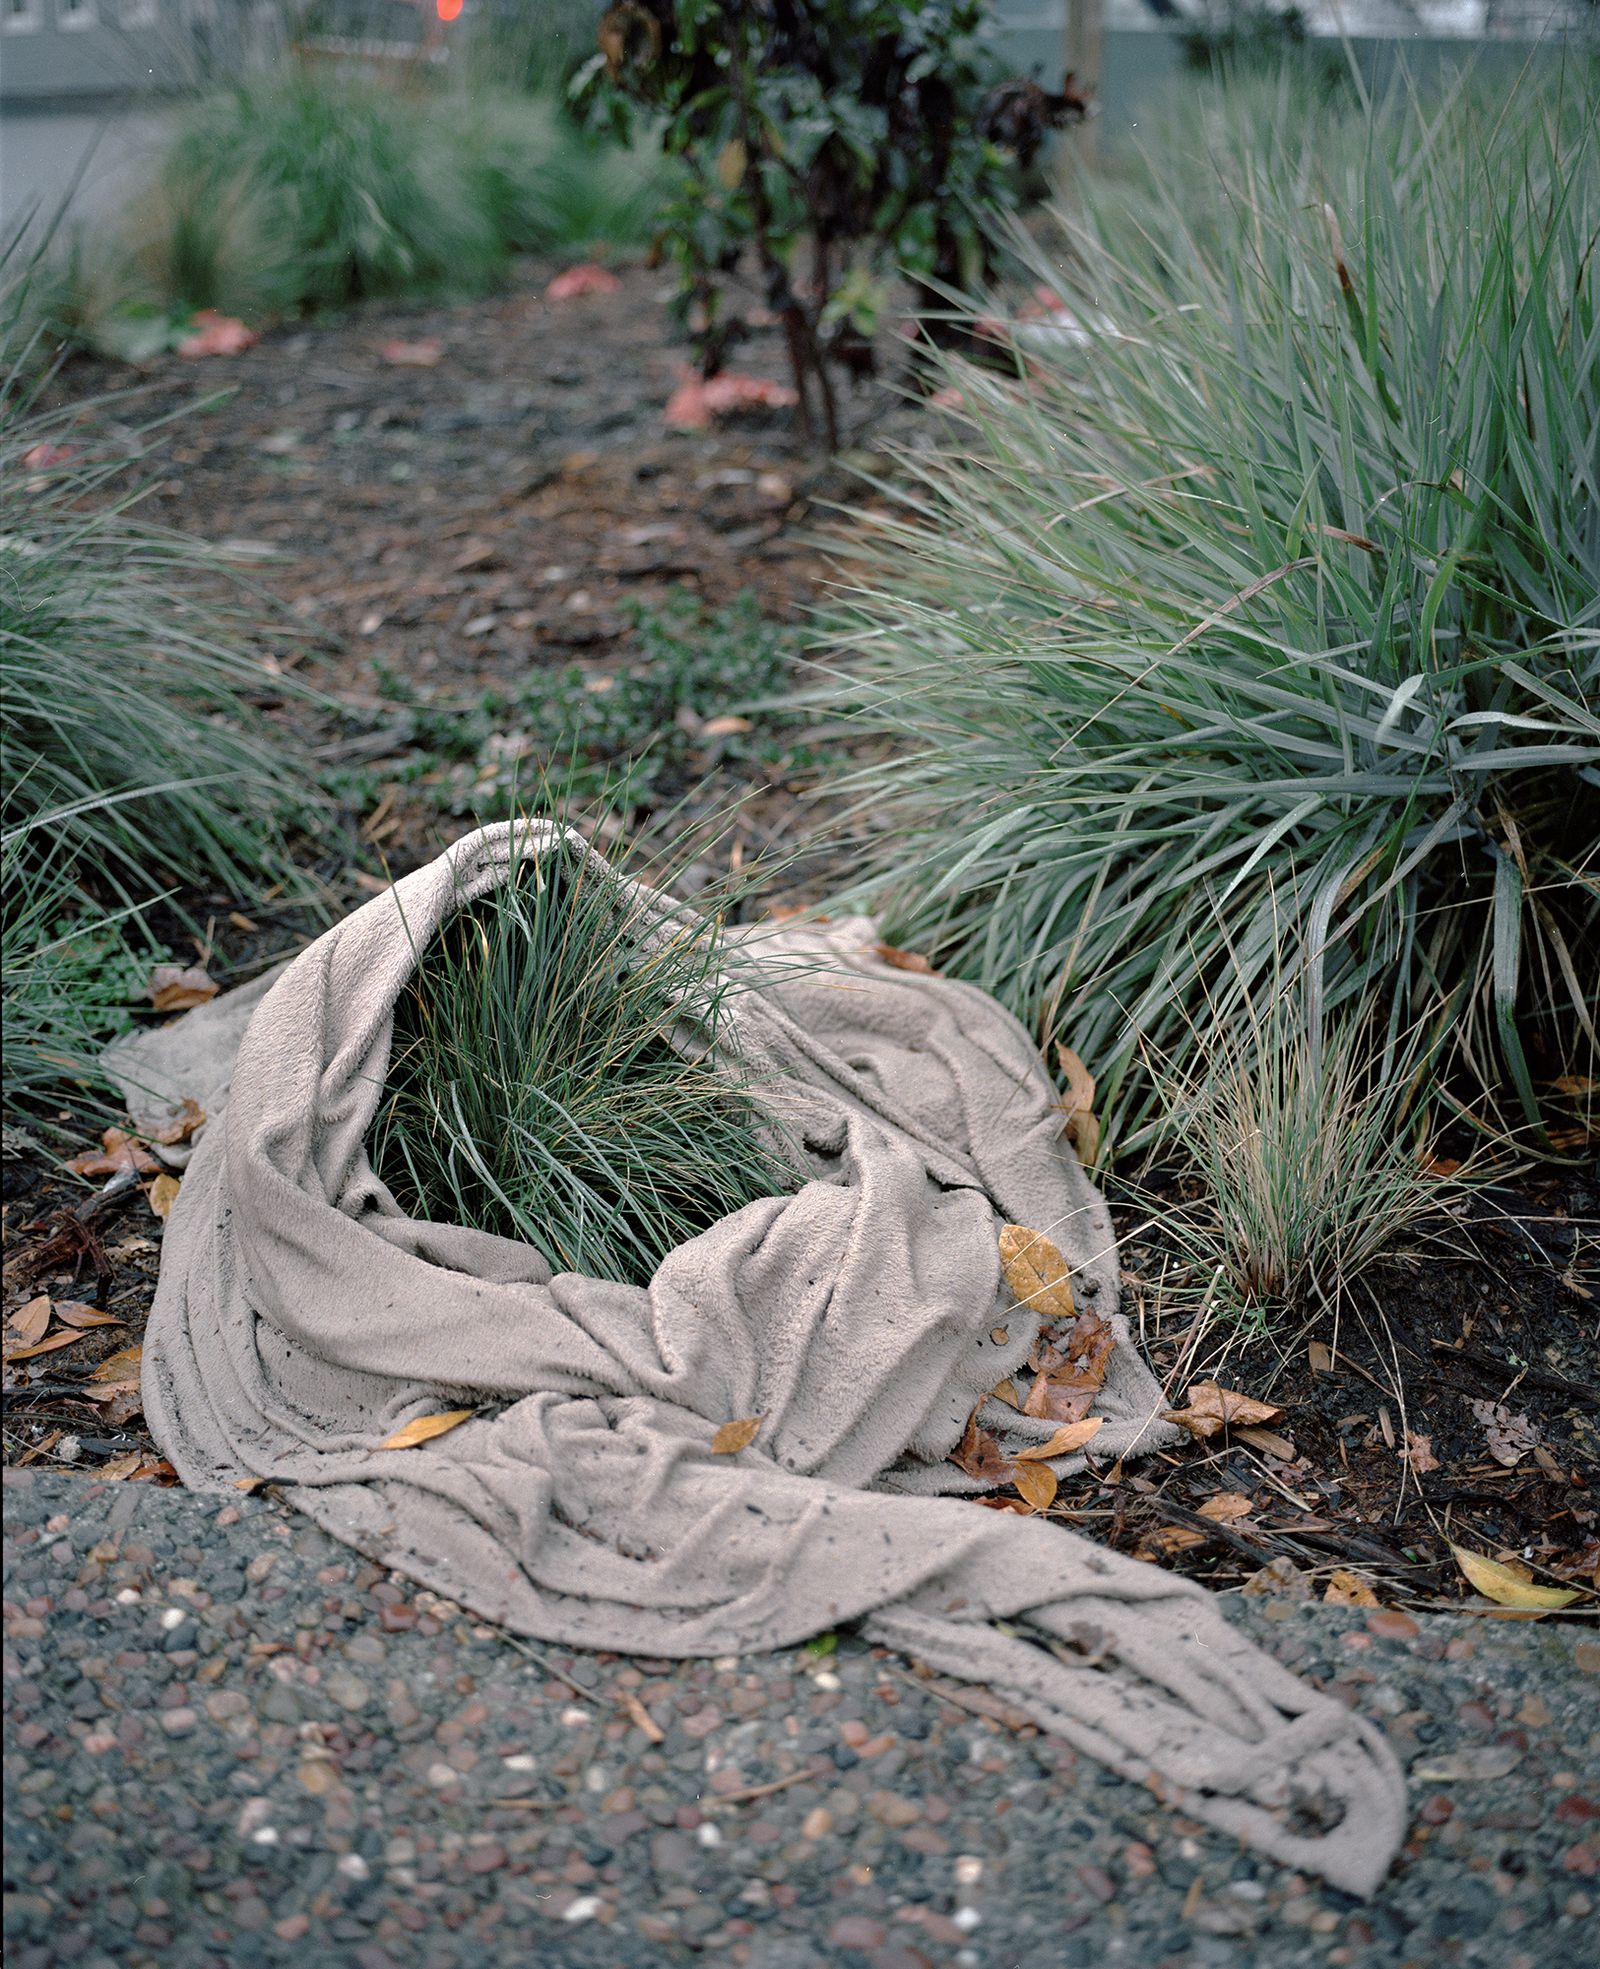 © Justin Maxon - An abandoned blanket is seen on the street in downtown Eureka.